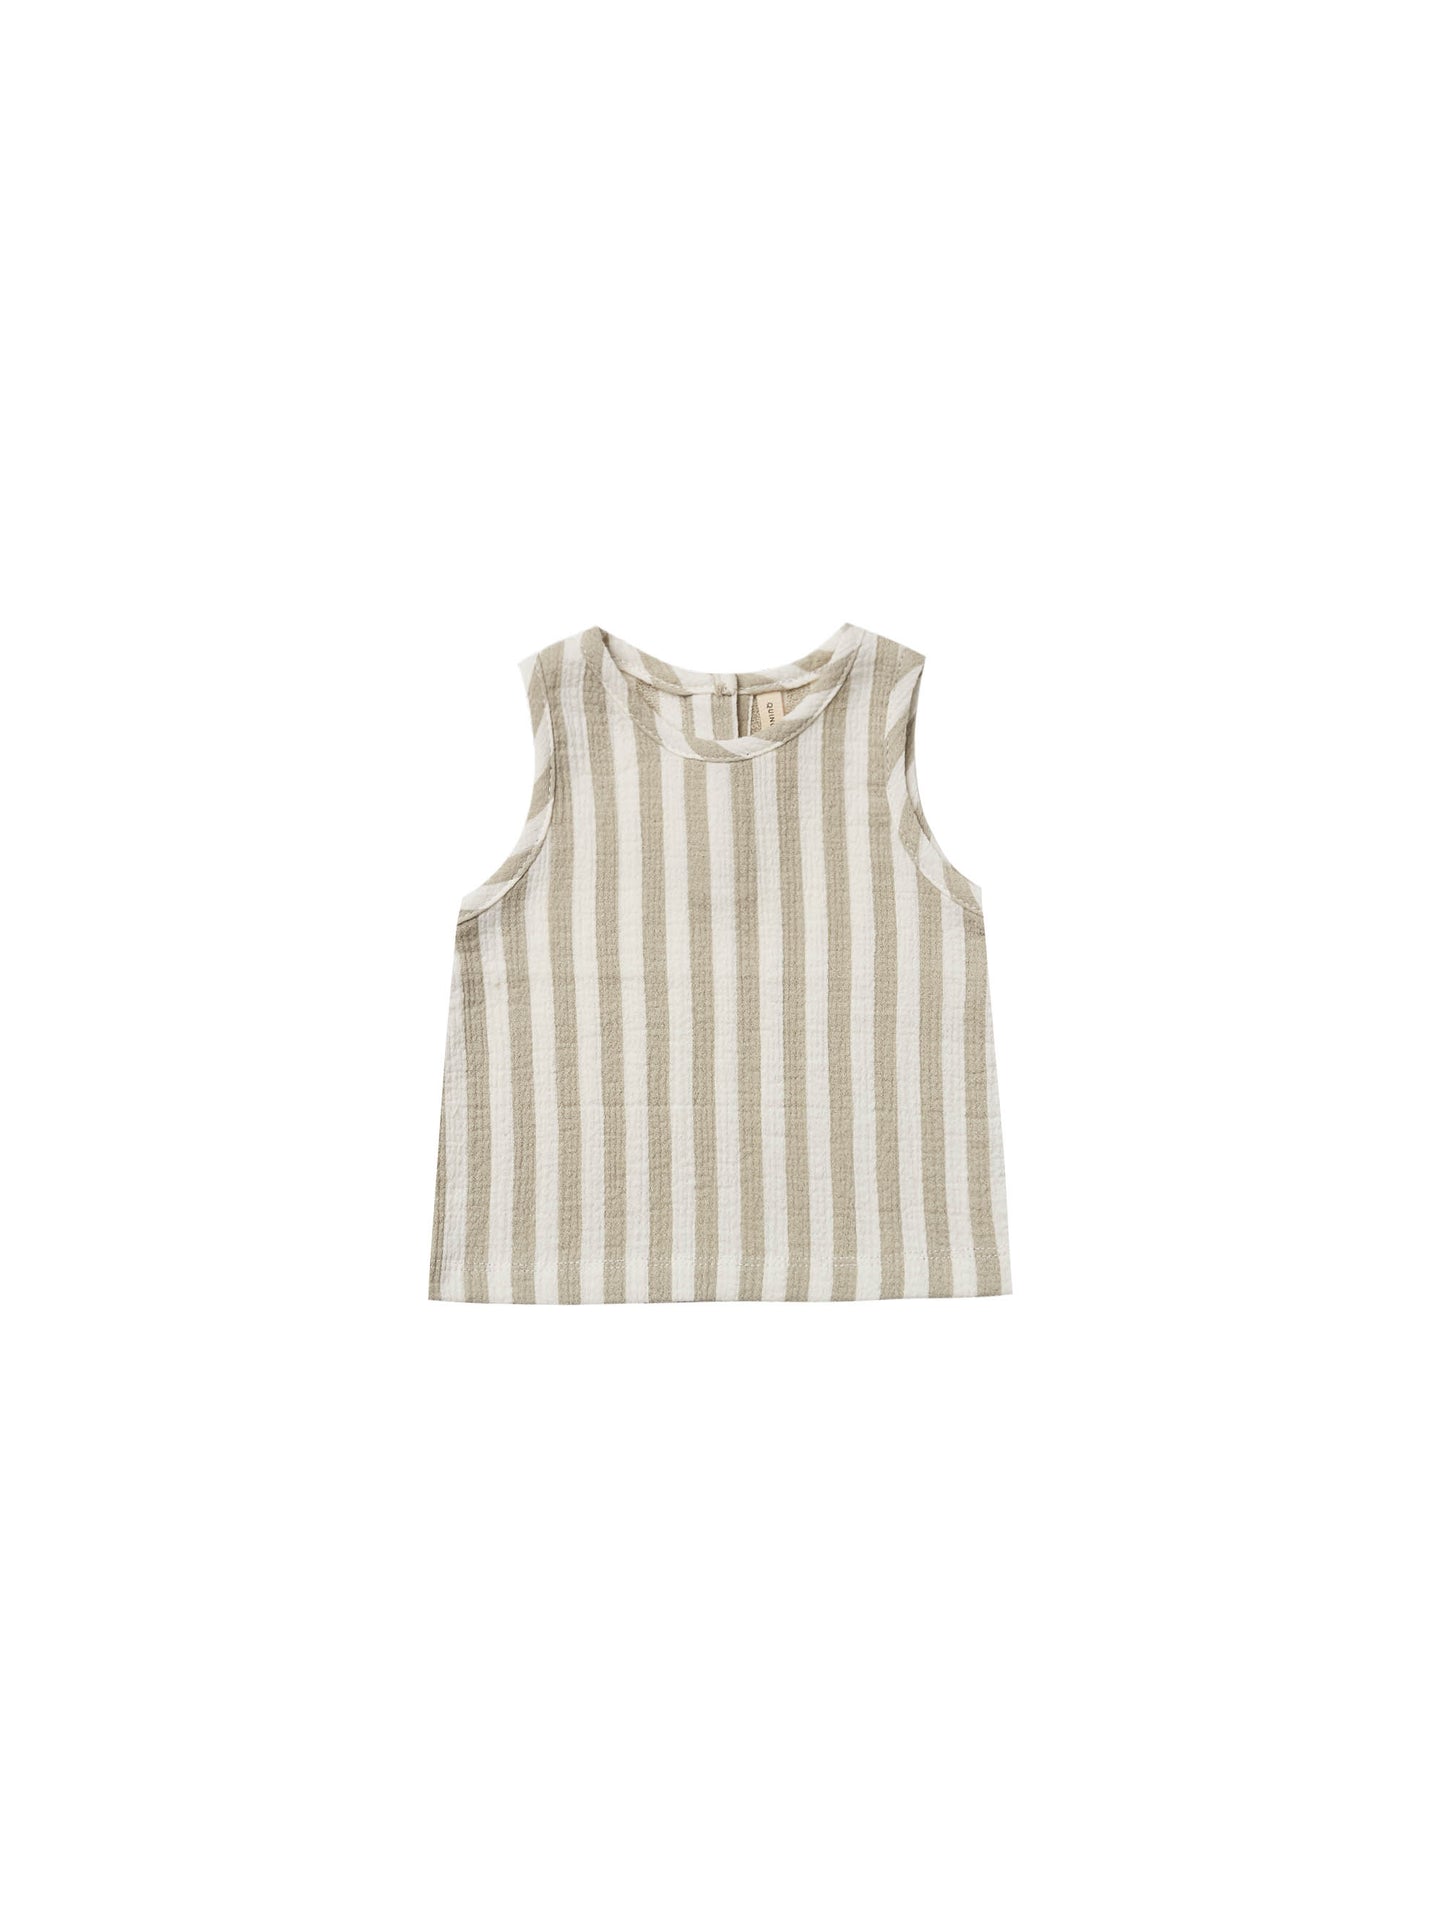 SALE - Quincy Mae Woven Tank - Multiple Colors Available